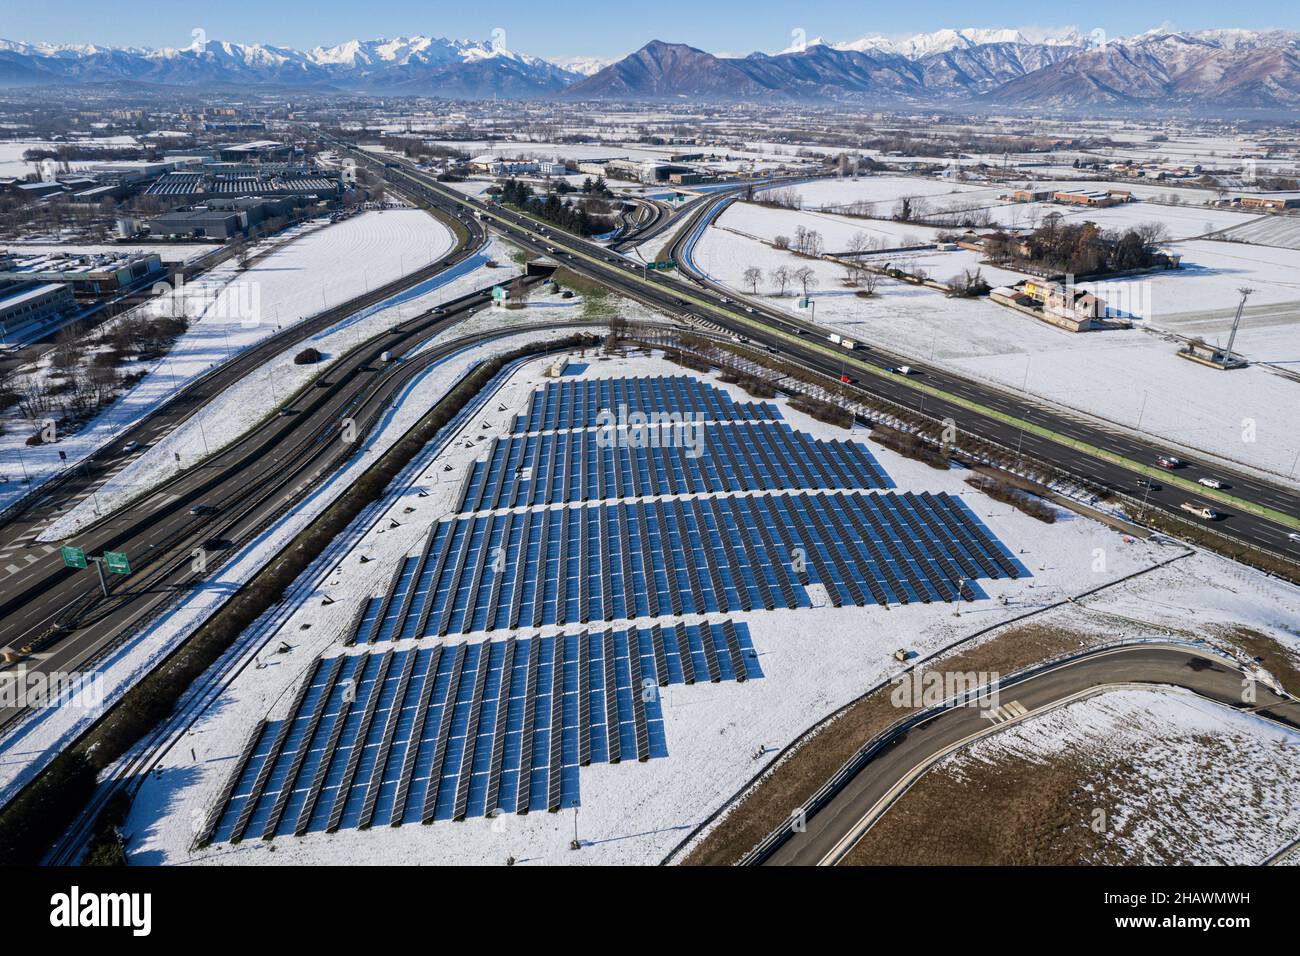 Aerial view of solar panels on a sunny winter day Stock Photo